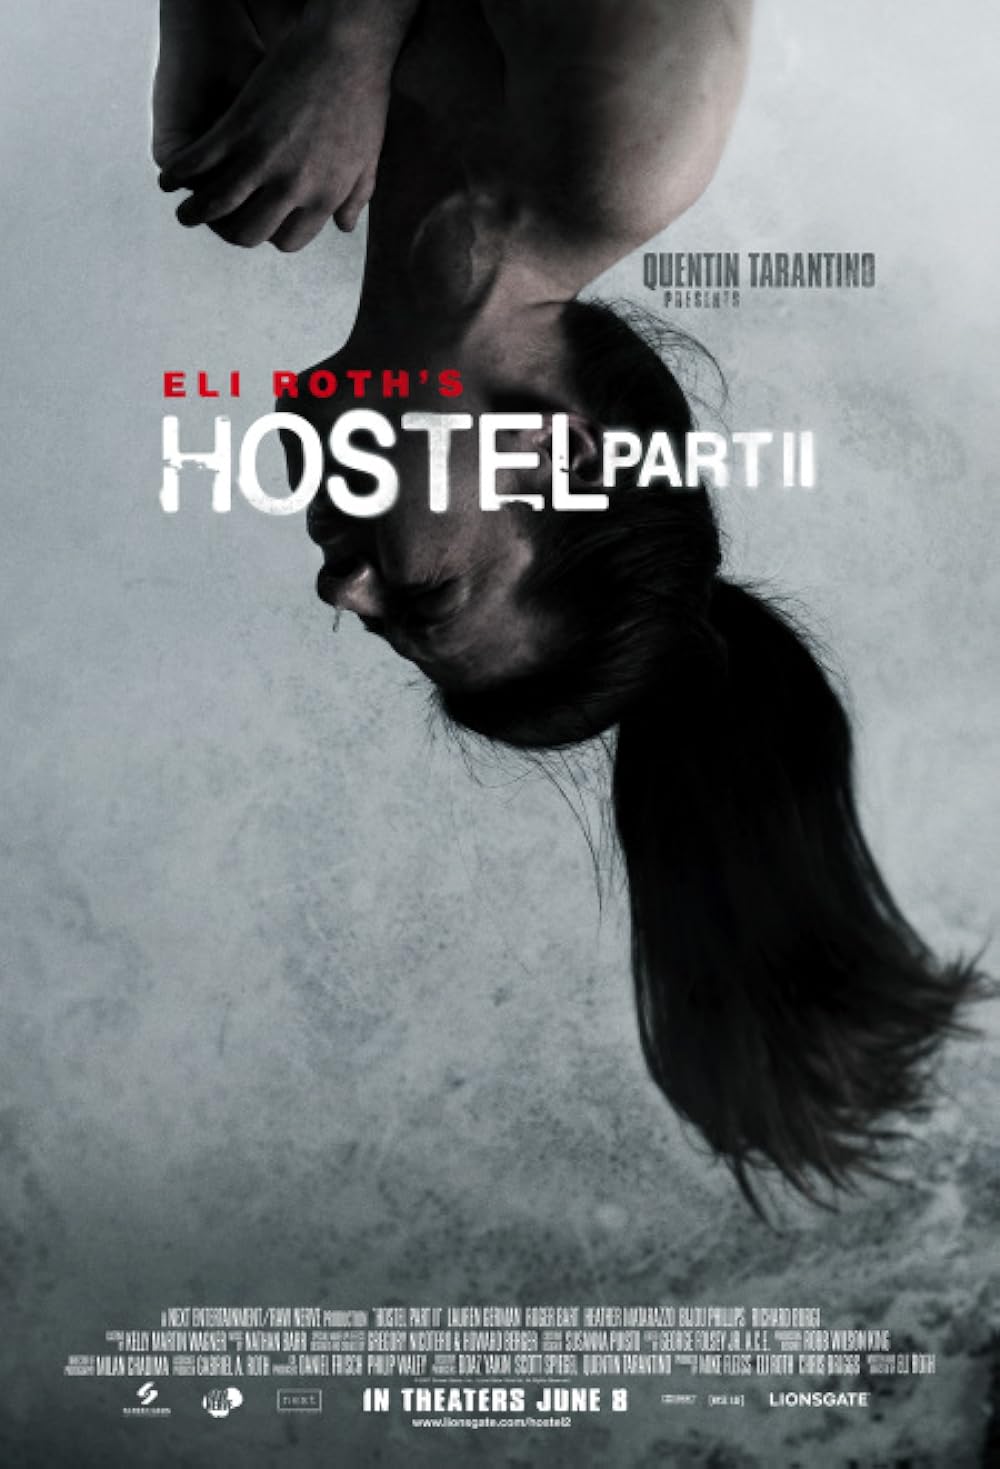 denise bussard recommends hostel 3 movie download pic